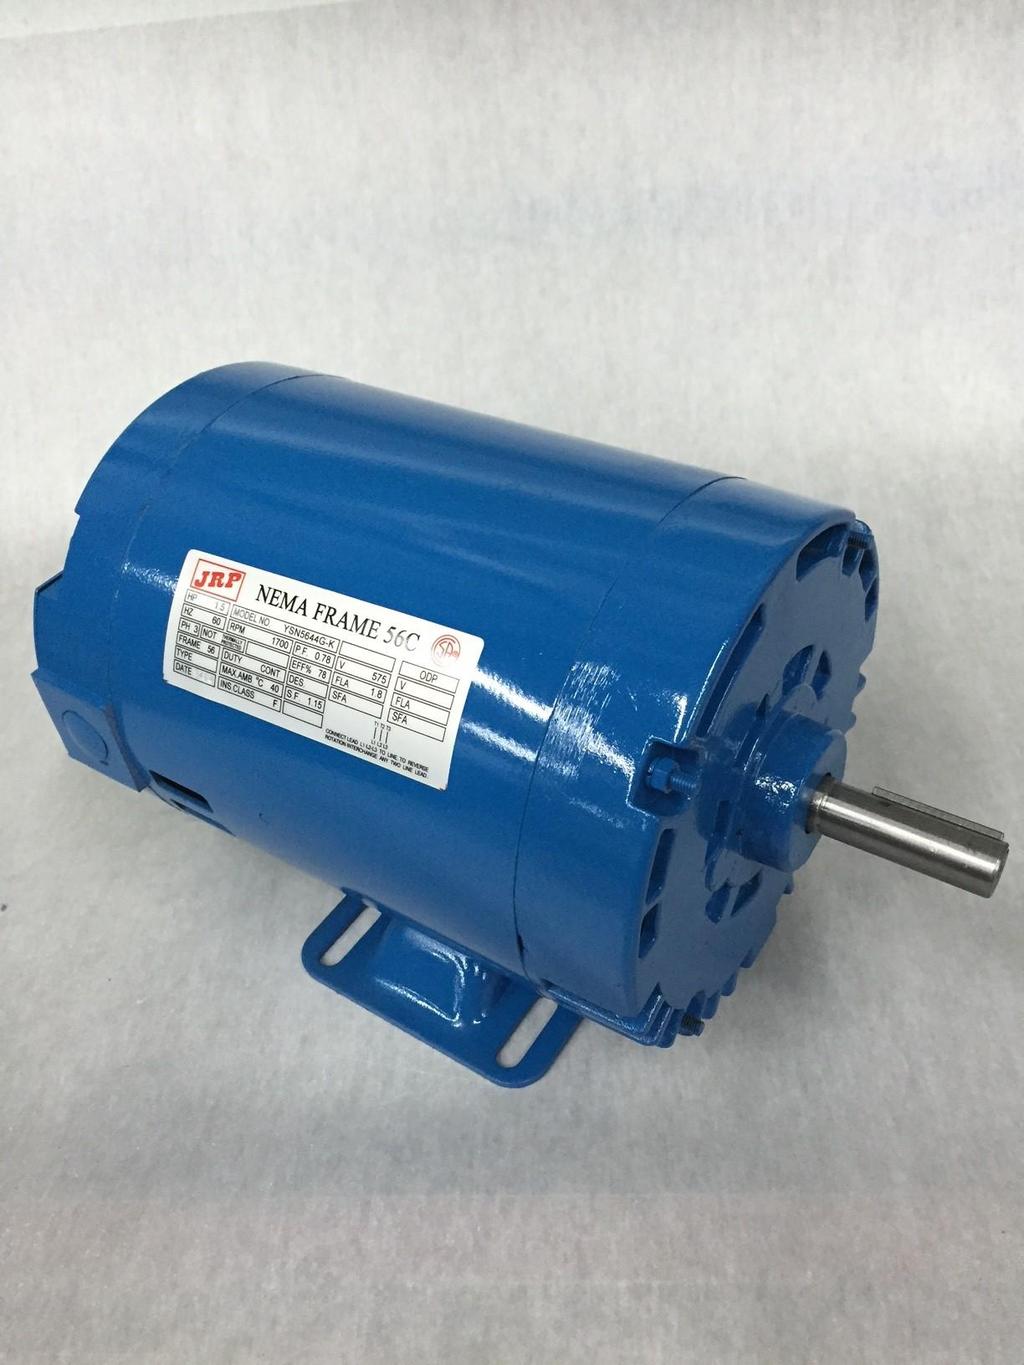 SINGLE PHASE DRIP-PROOF MOTORS HP RPM VOLTS FRAME AMPS WT. LIST 30 V. DIMENSION LBS /3 75 5/08-30 56 3. 9.38 8 30.00 $ / 75 5/08-30 56 5.4 9.88 335.00 $ 3/4 75 5/08-30 56 4.4 0.88 6 36.